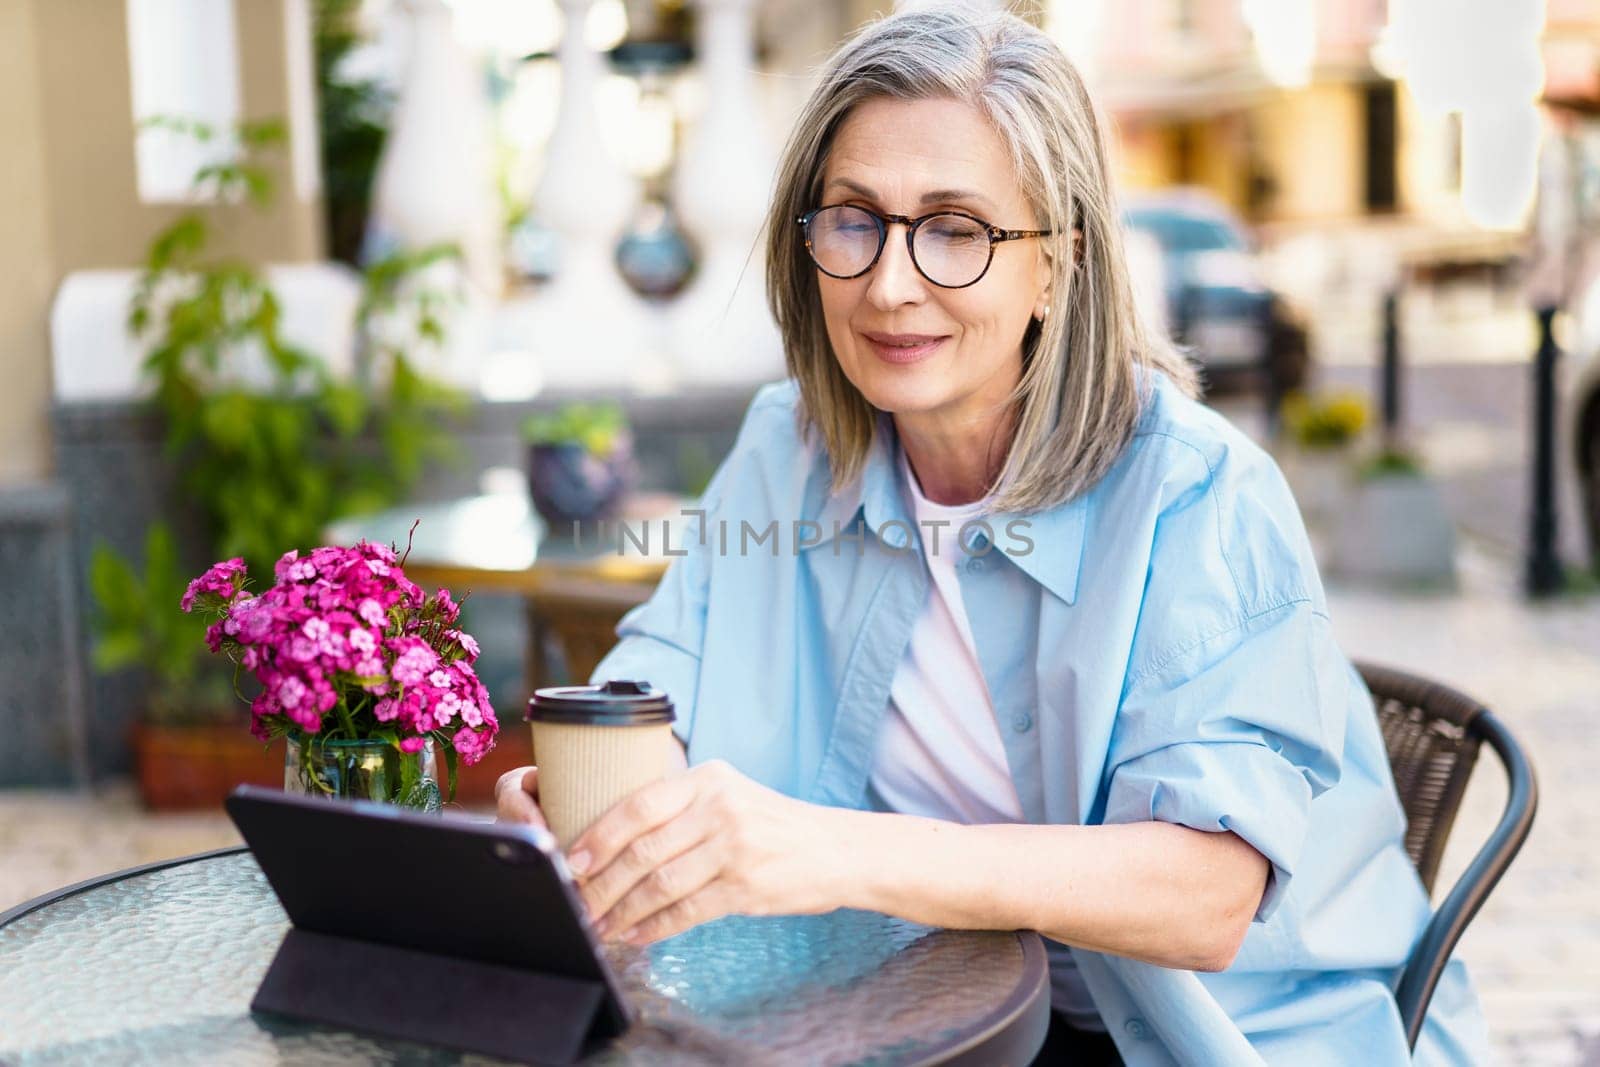 Silver-haired mature European woman sitting at an outdoor cafe, smiling with joy as she looks at her tablet PC. The image captures the happiness and contentment of a retiree enjoying leisure time and staying connected with the world through technology. High quality photo